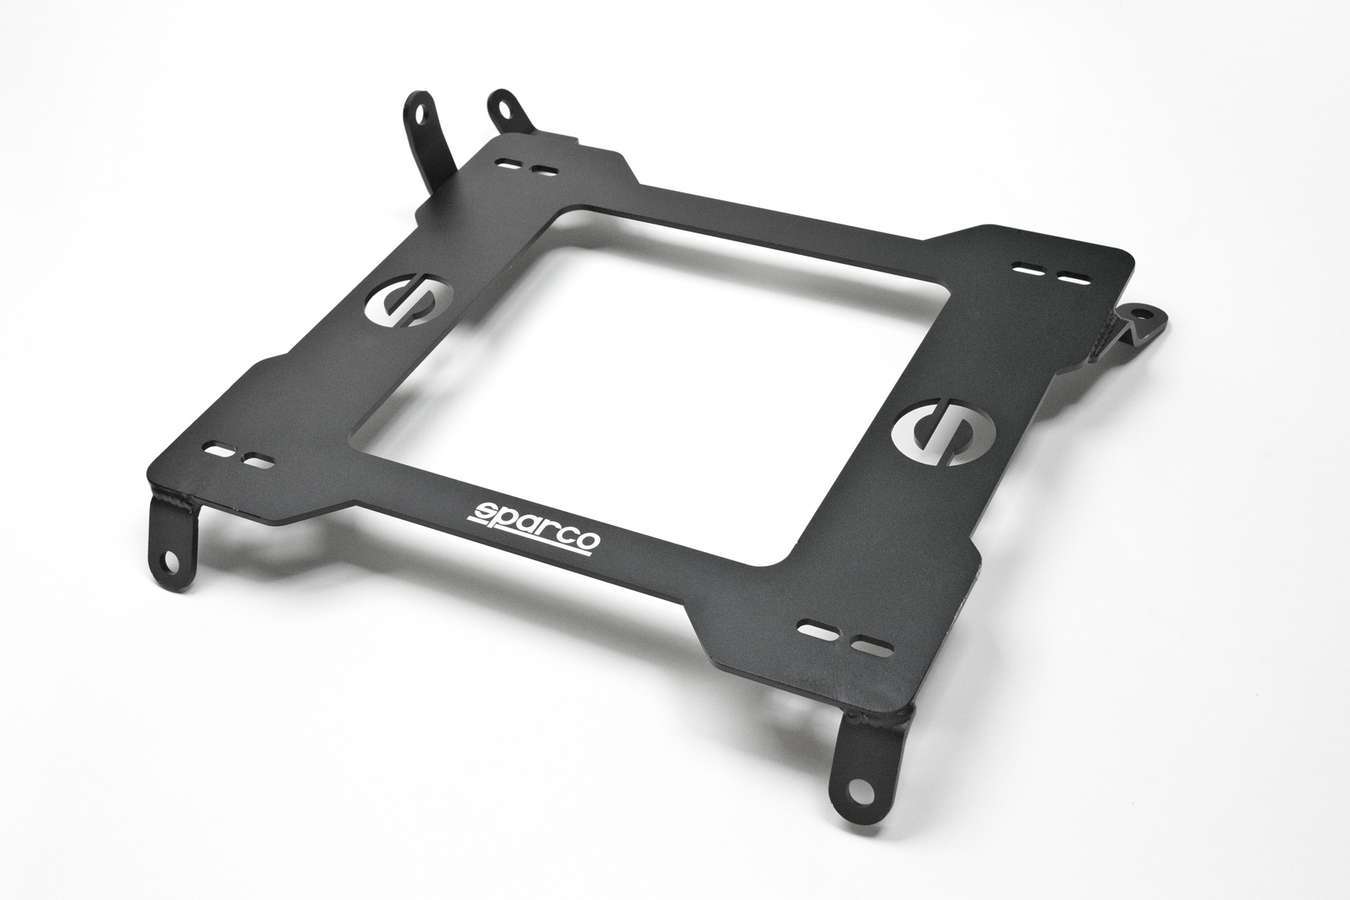 Sparco 600SB010R Seat Adapter Bracket, 600 Series, Sparco to Passenger Side Ford Mustang 1979-98, Steel, Black Powder Coat, Each